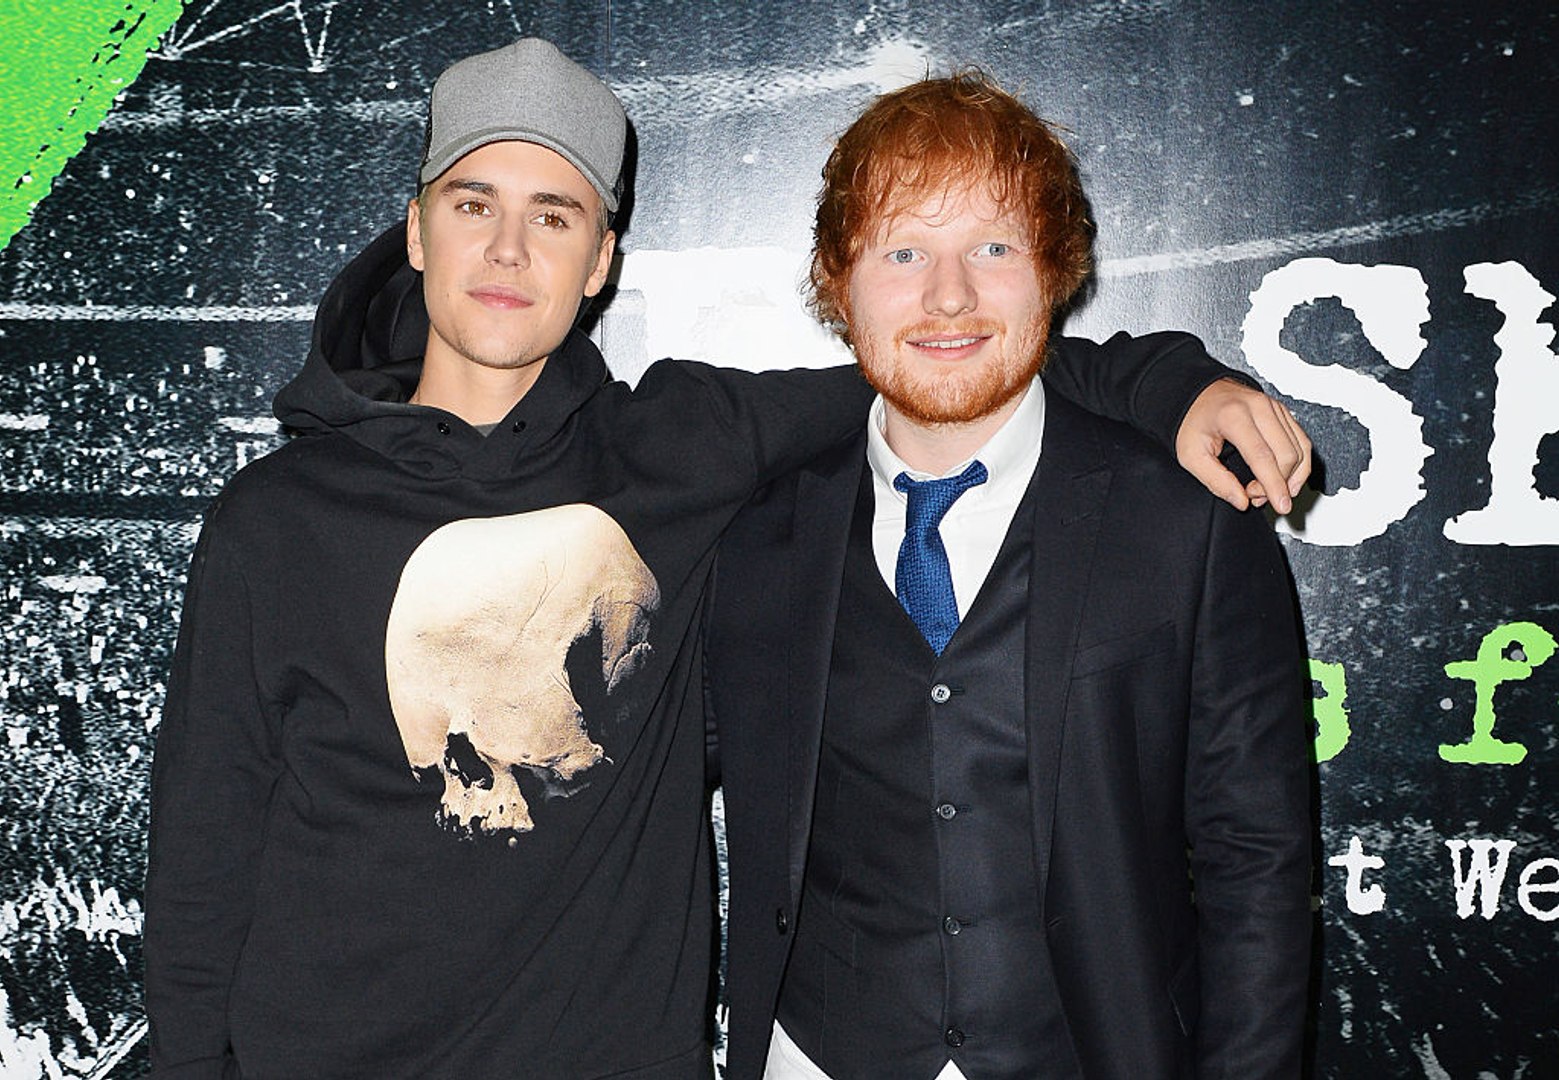 Ed Sheeran once hit Justin Bieber in the face with a golf club